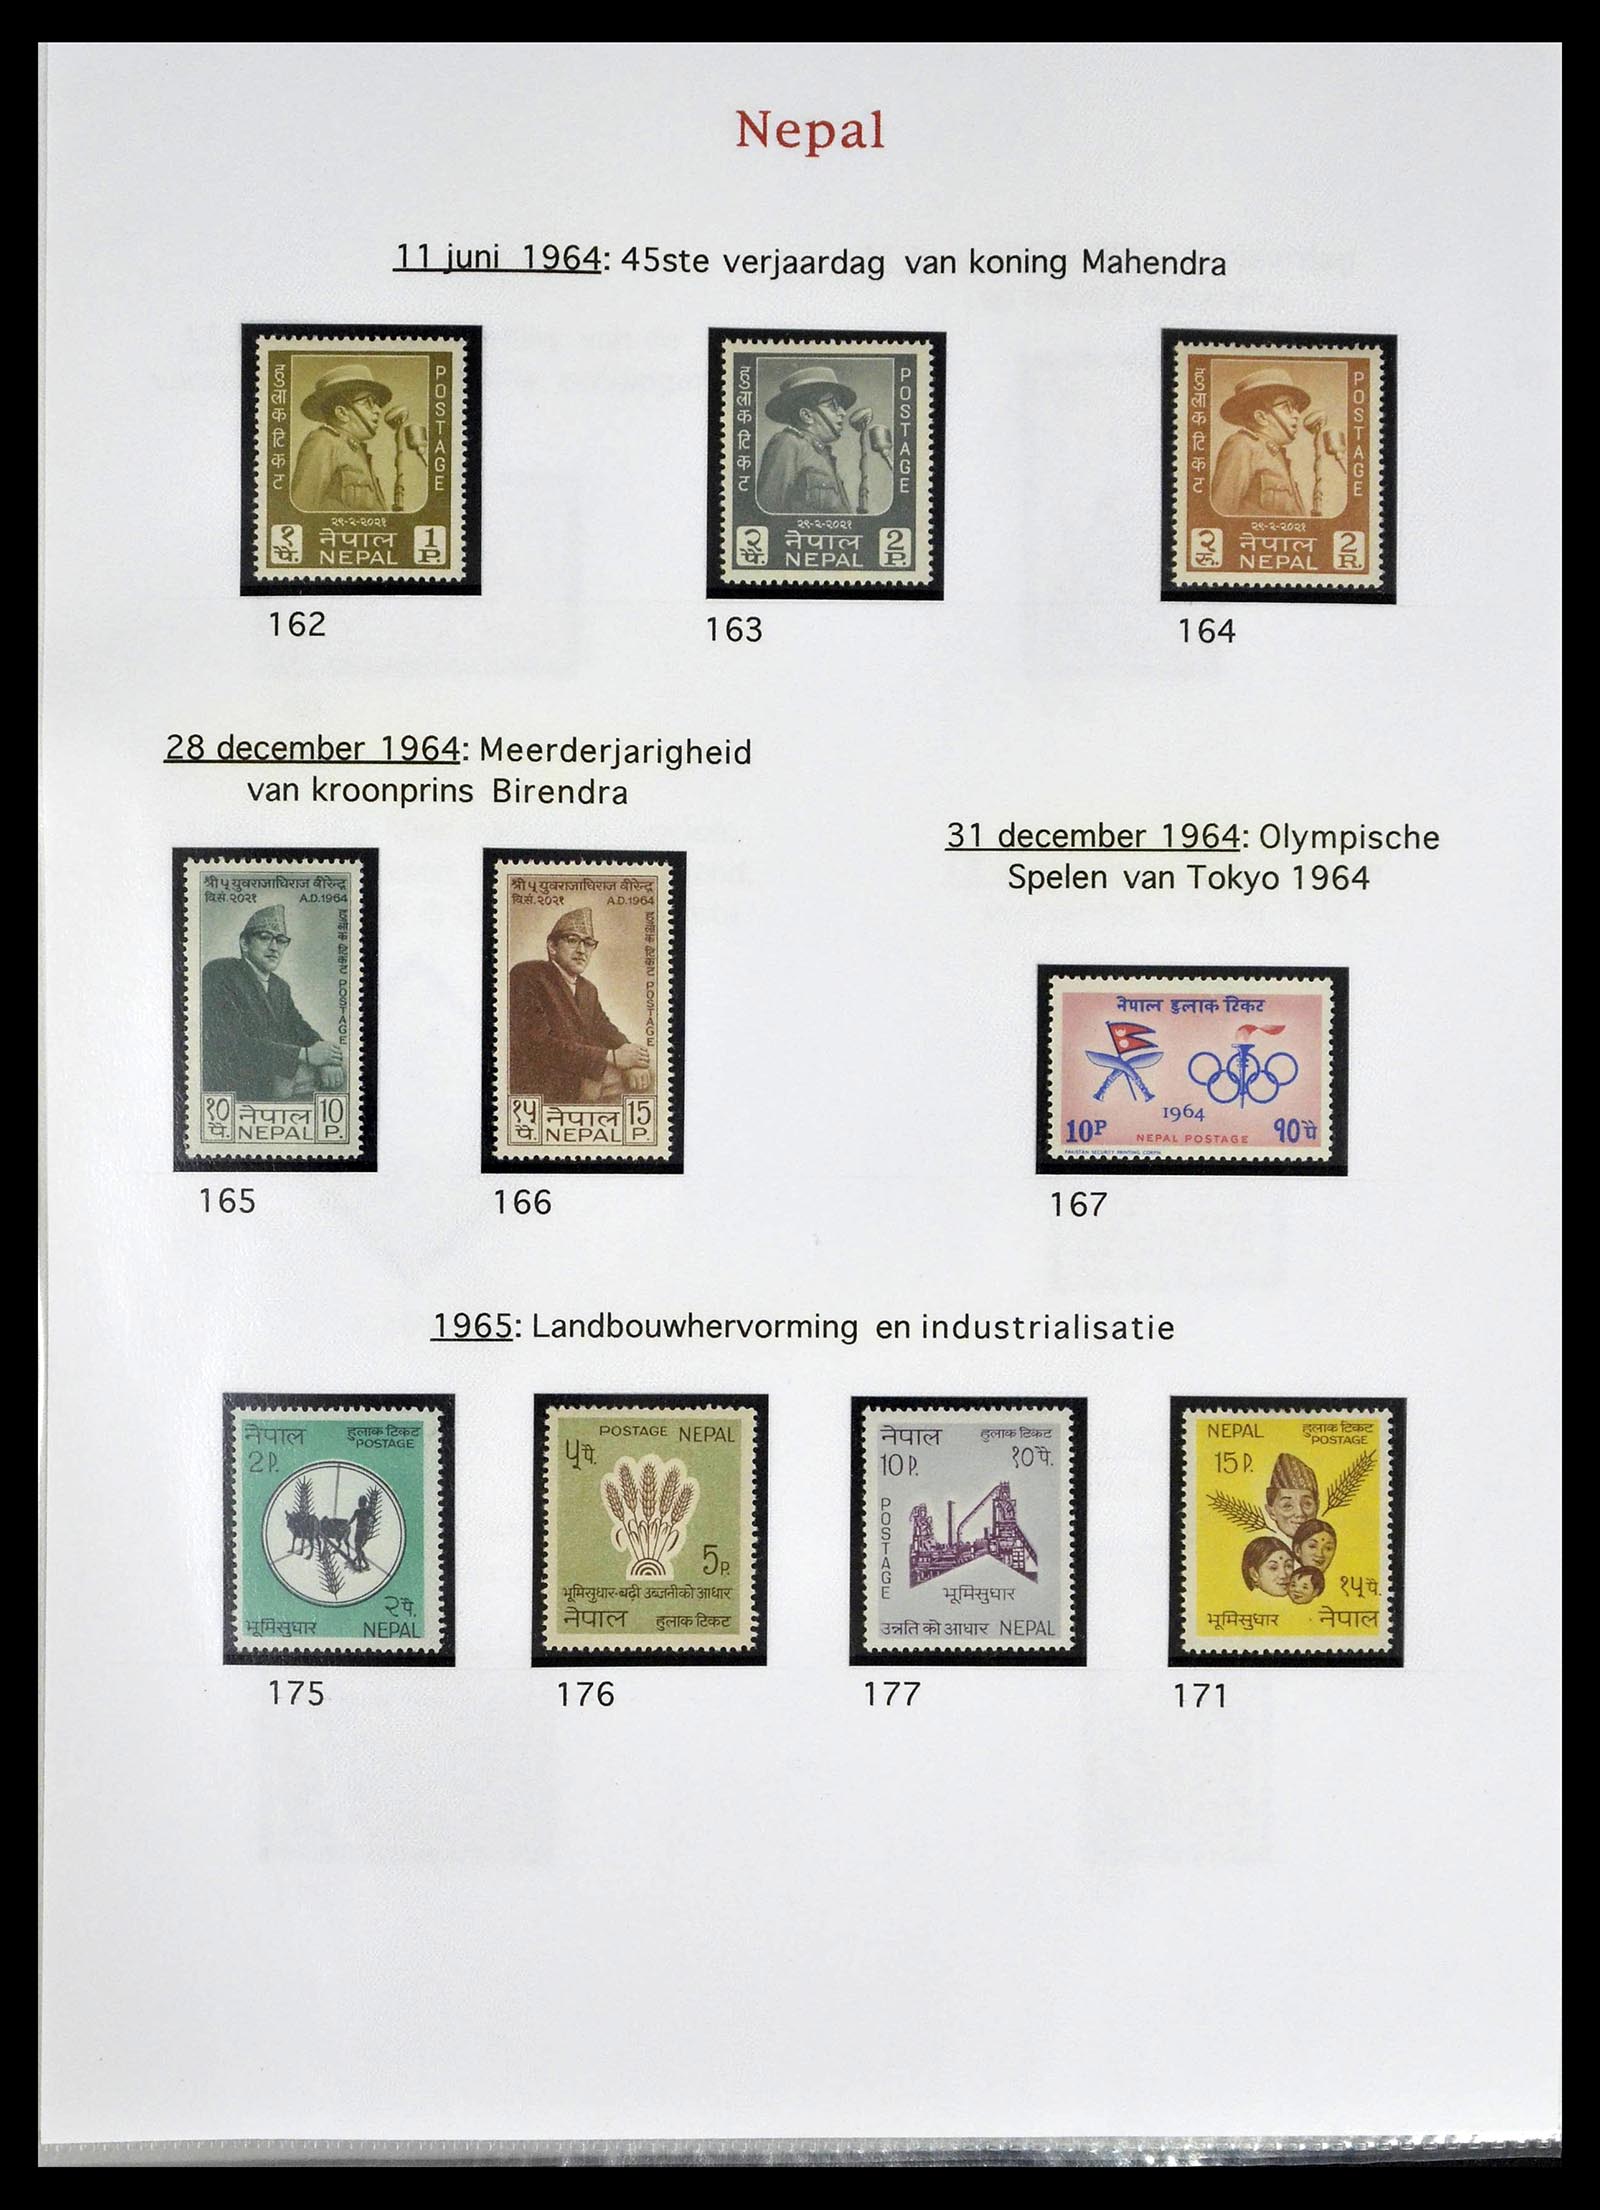 39313 0018 - Stamp collection 39313 Nepal 1881-1999.